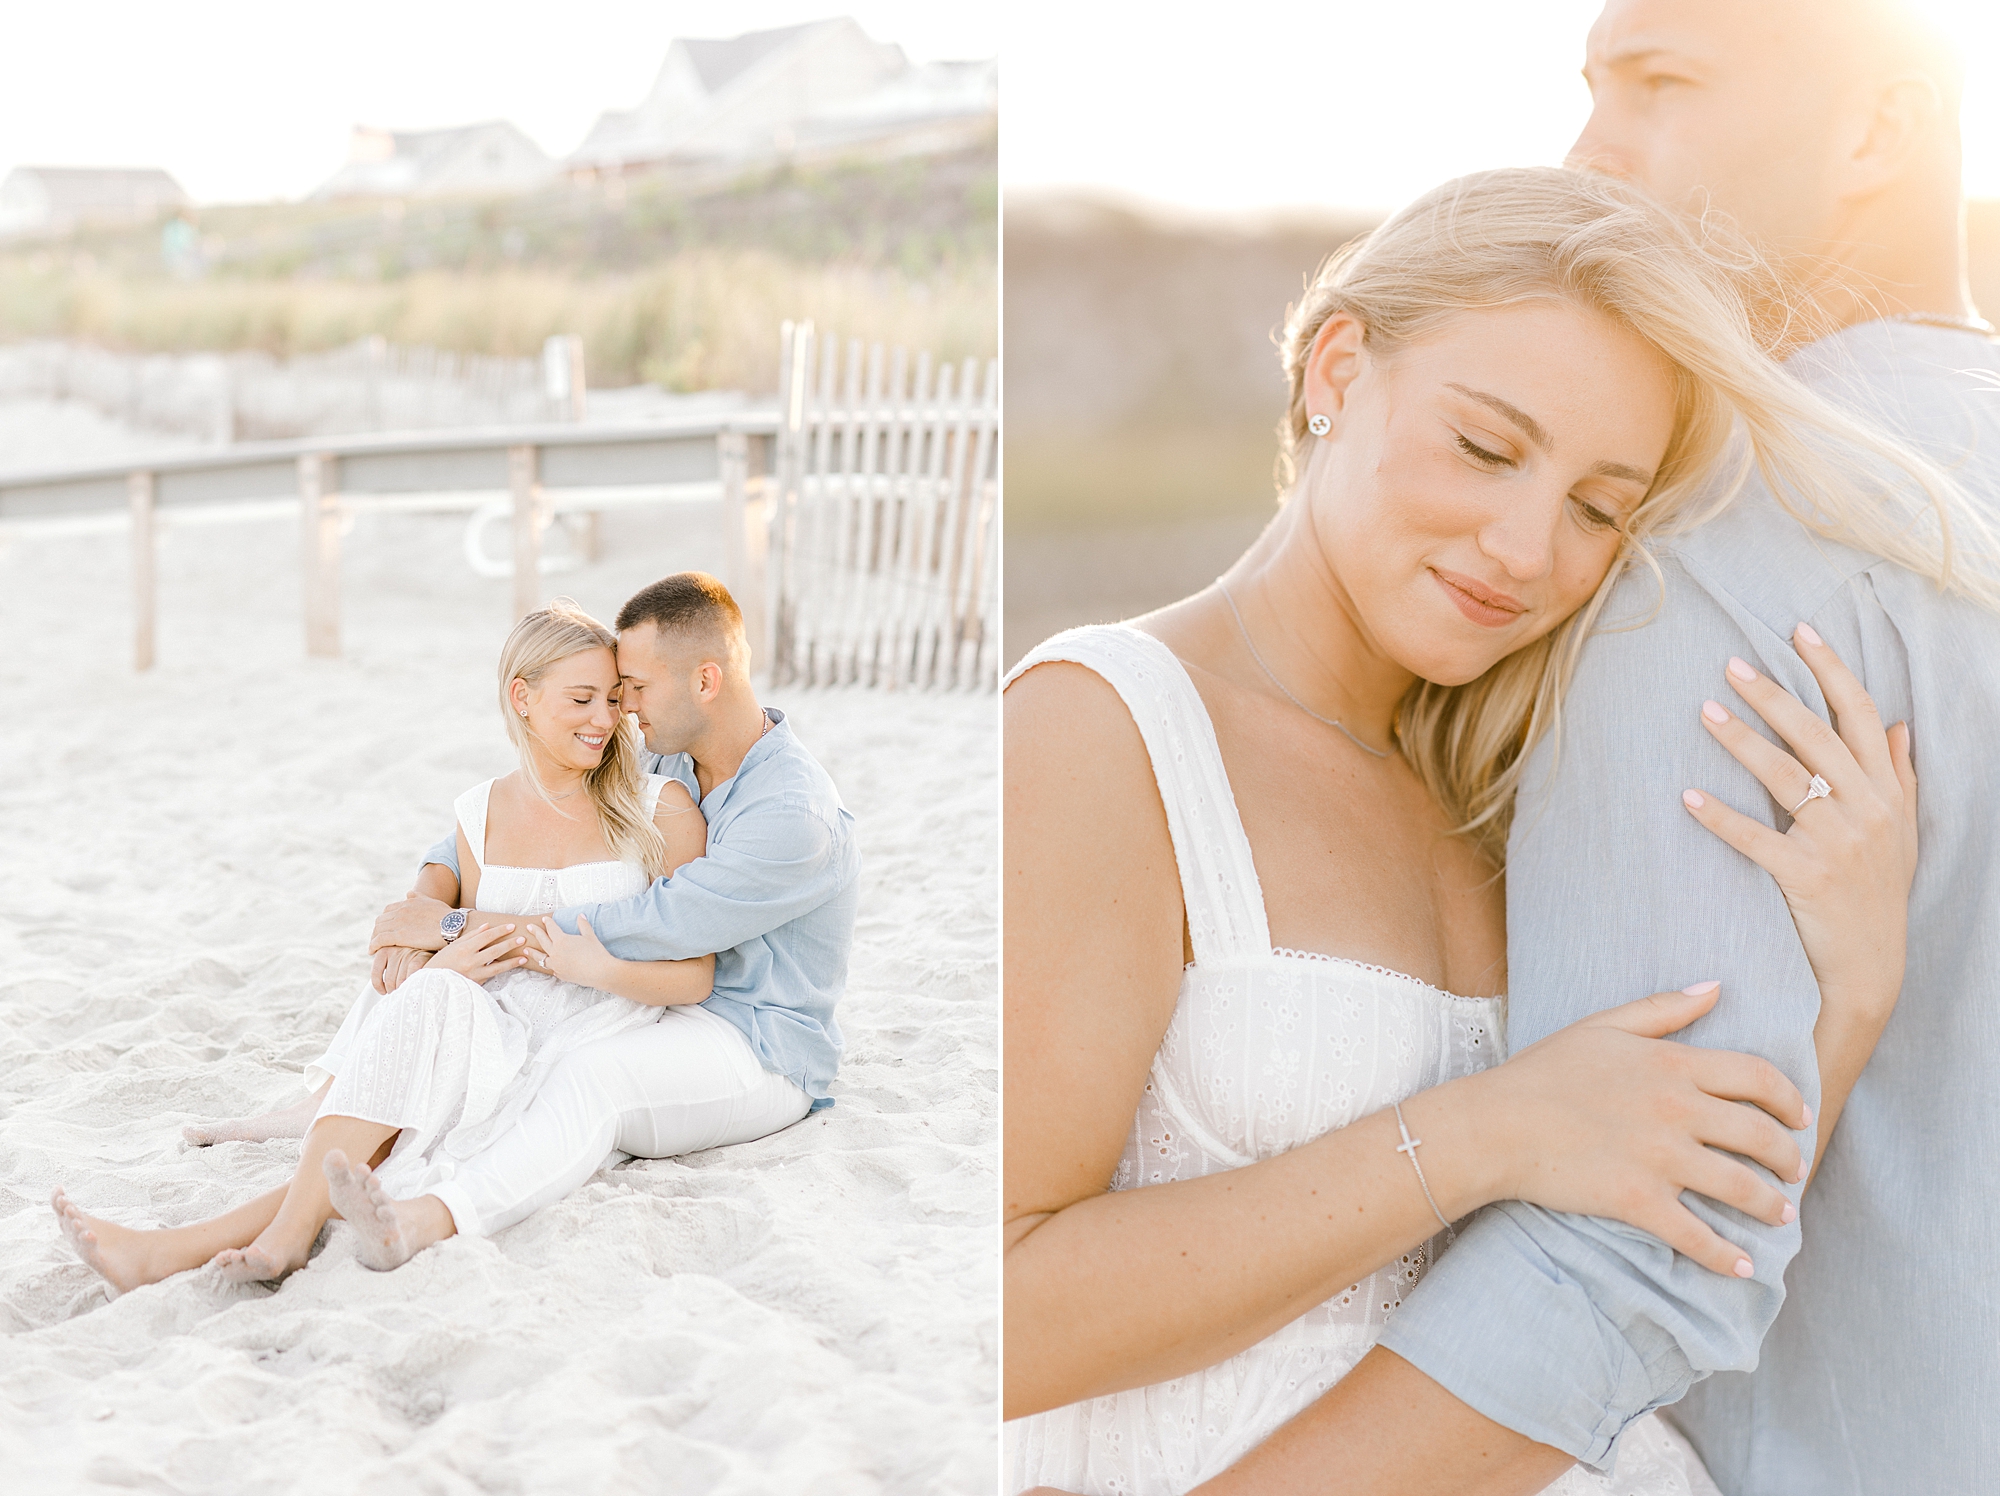 engaged couple hugs and snuggles on dune during beach engagement session in Lavallette, NJ